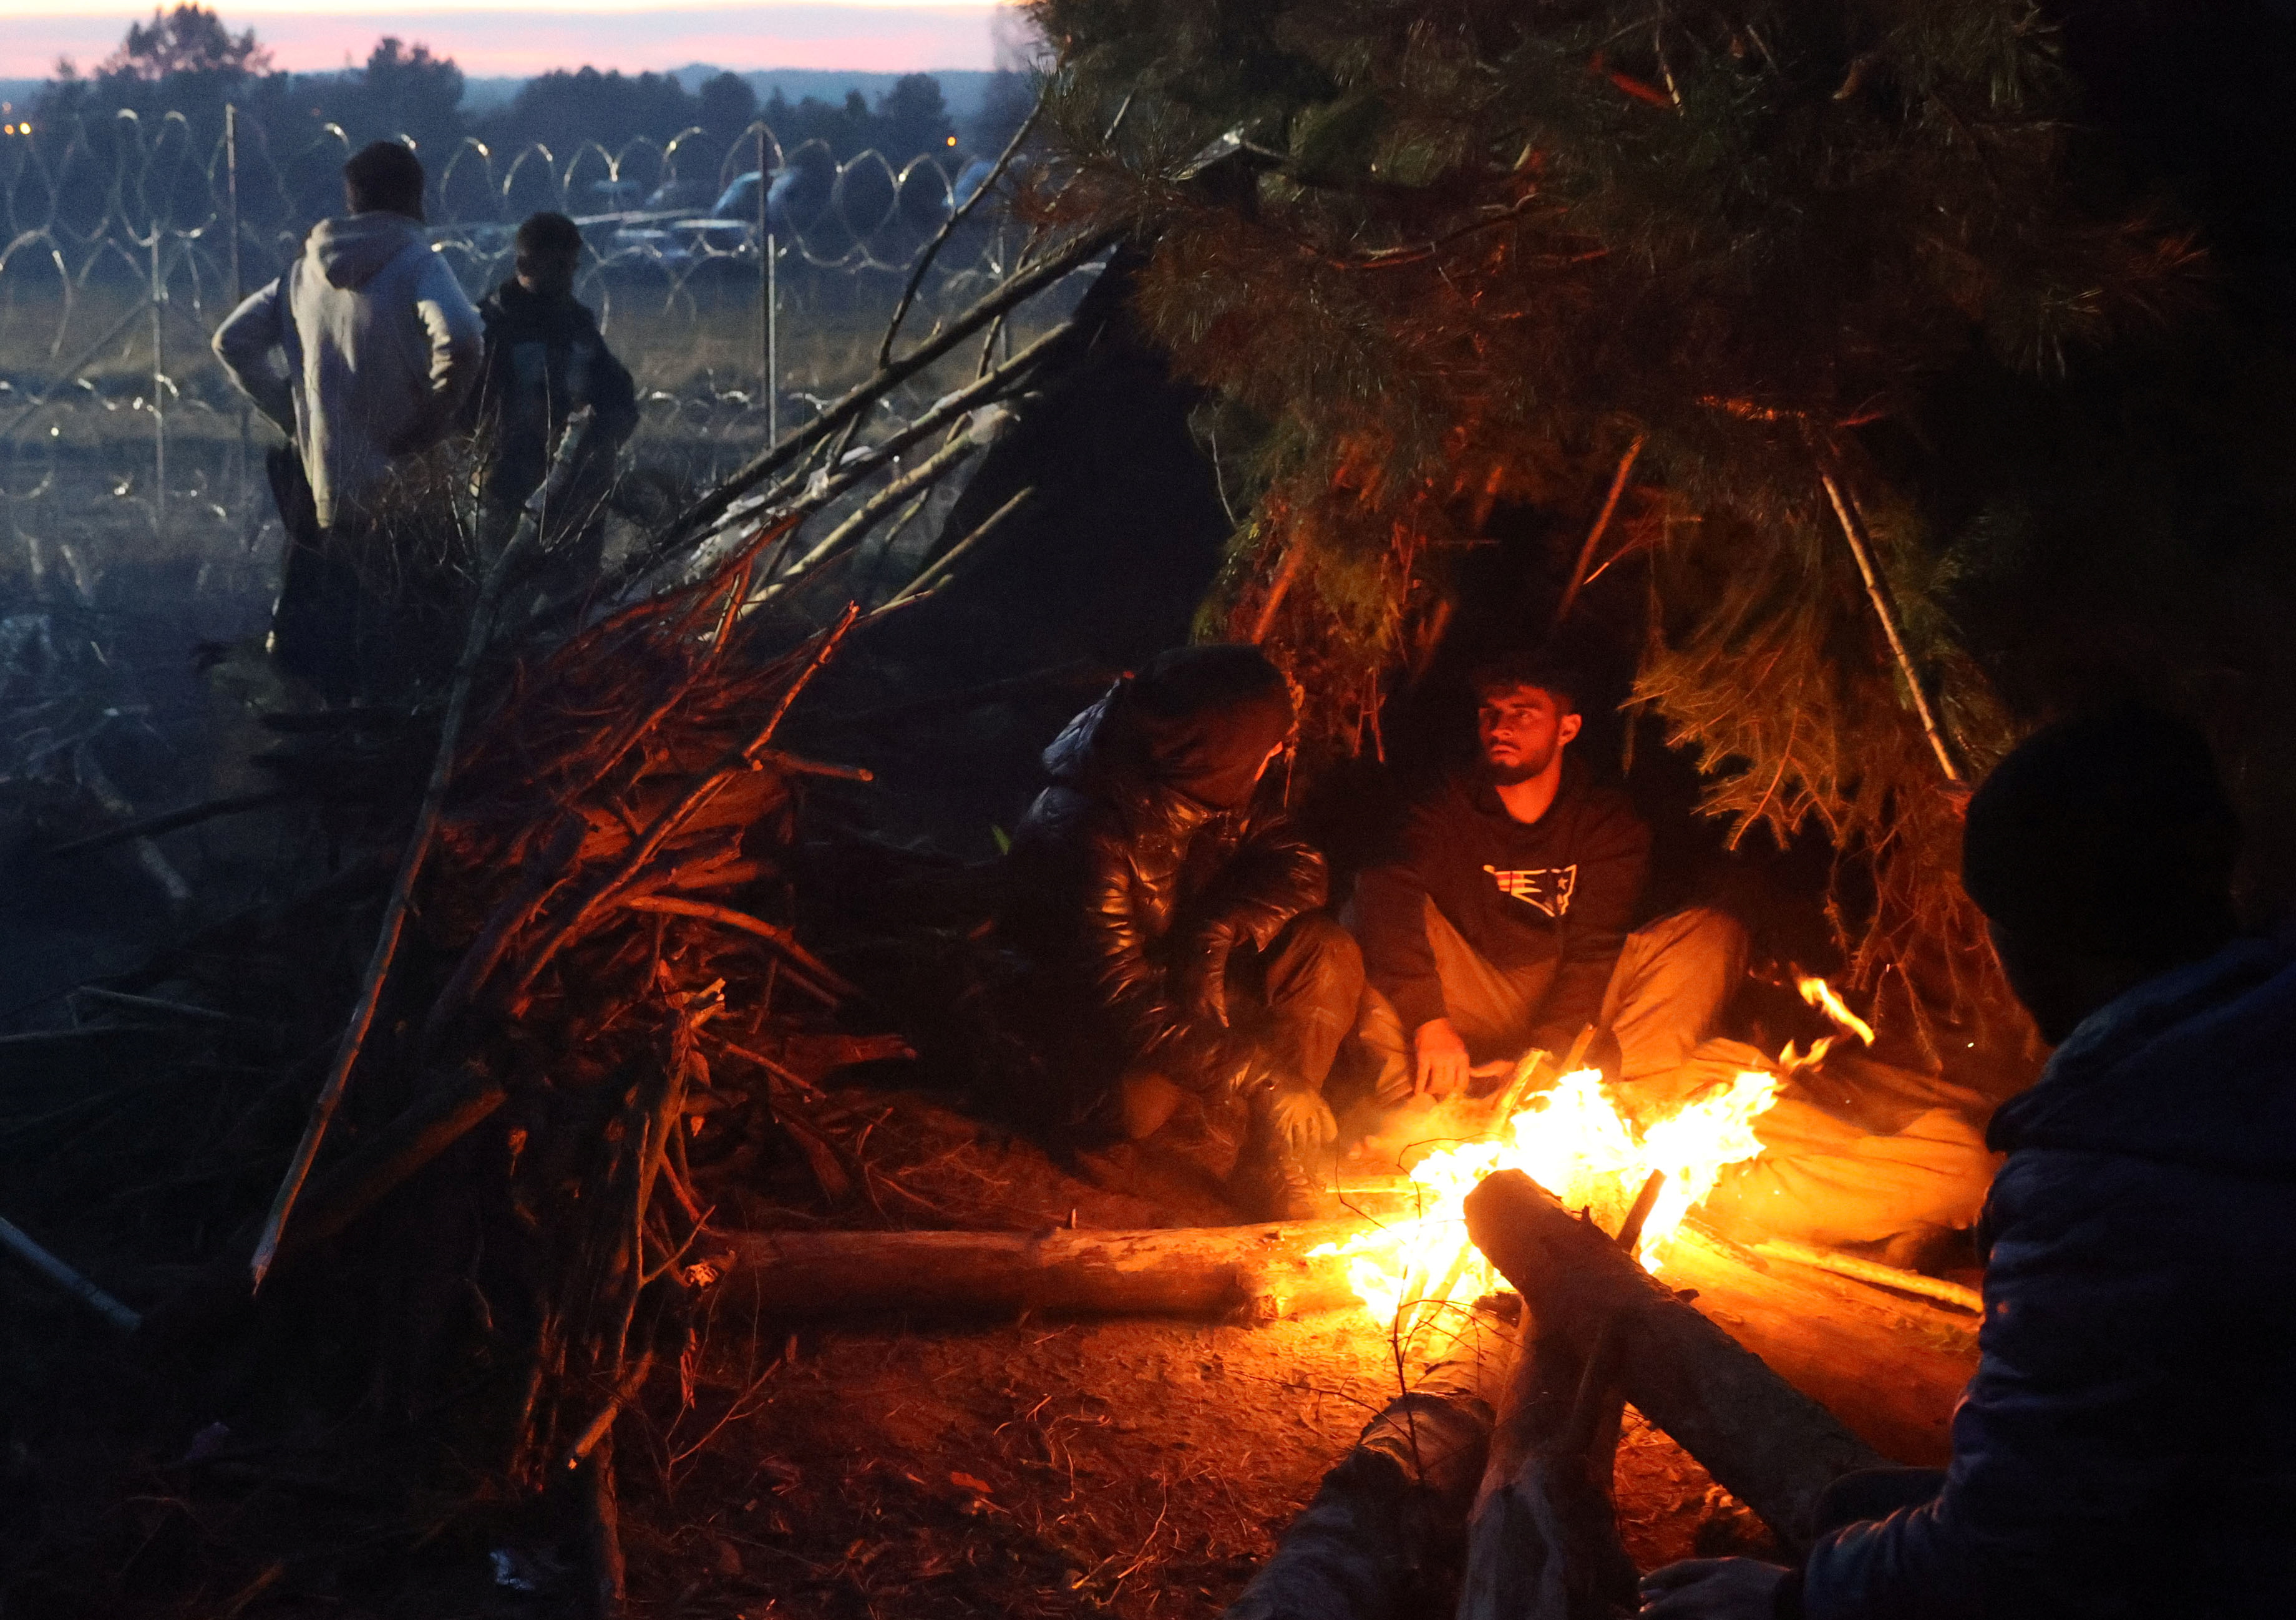 Migrants gather near a fire on the Belarusian-Polish border in the Grodno region